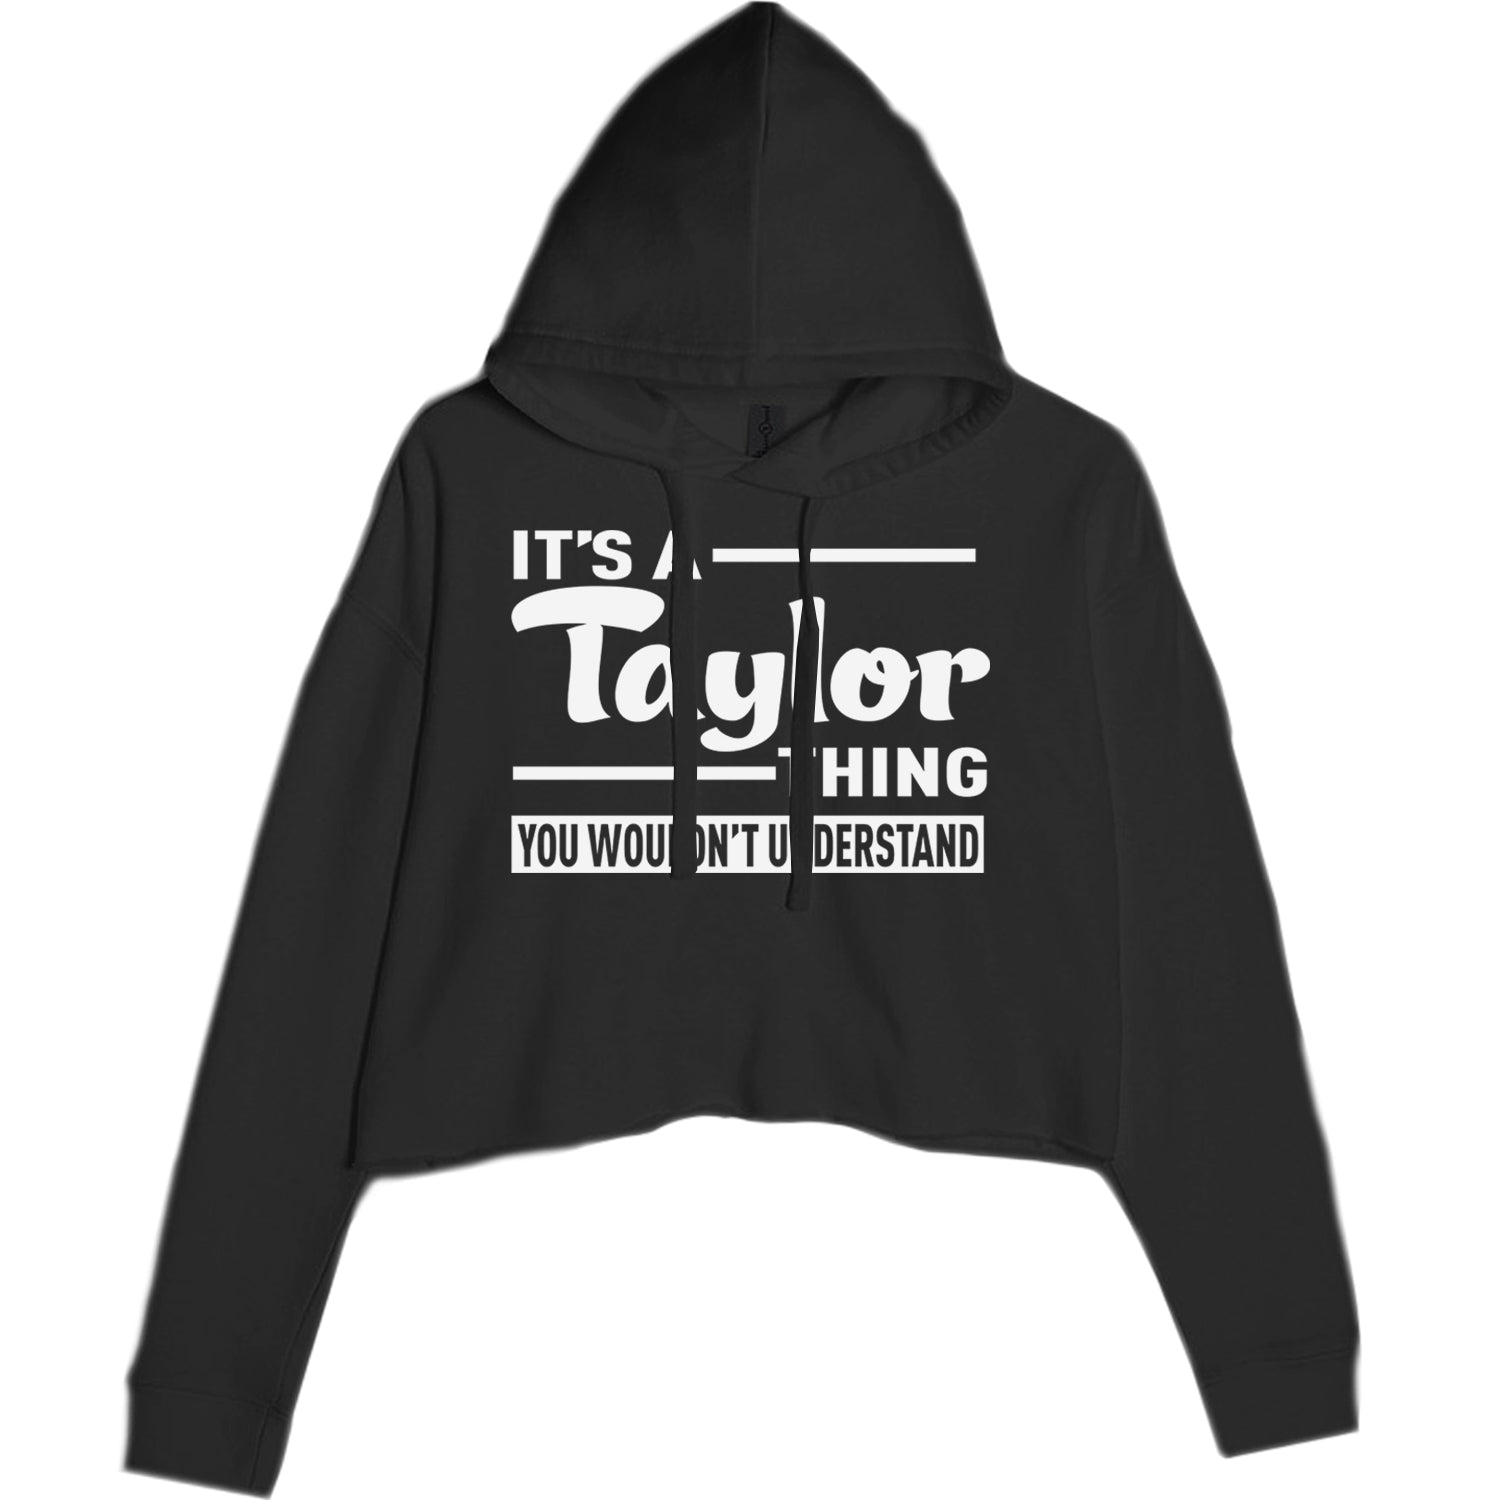 It's A Taylor Thing, You Wouldn't Understand TTPD Cropped Hoodie Sweatshirt